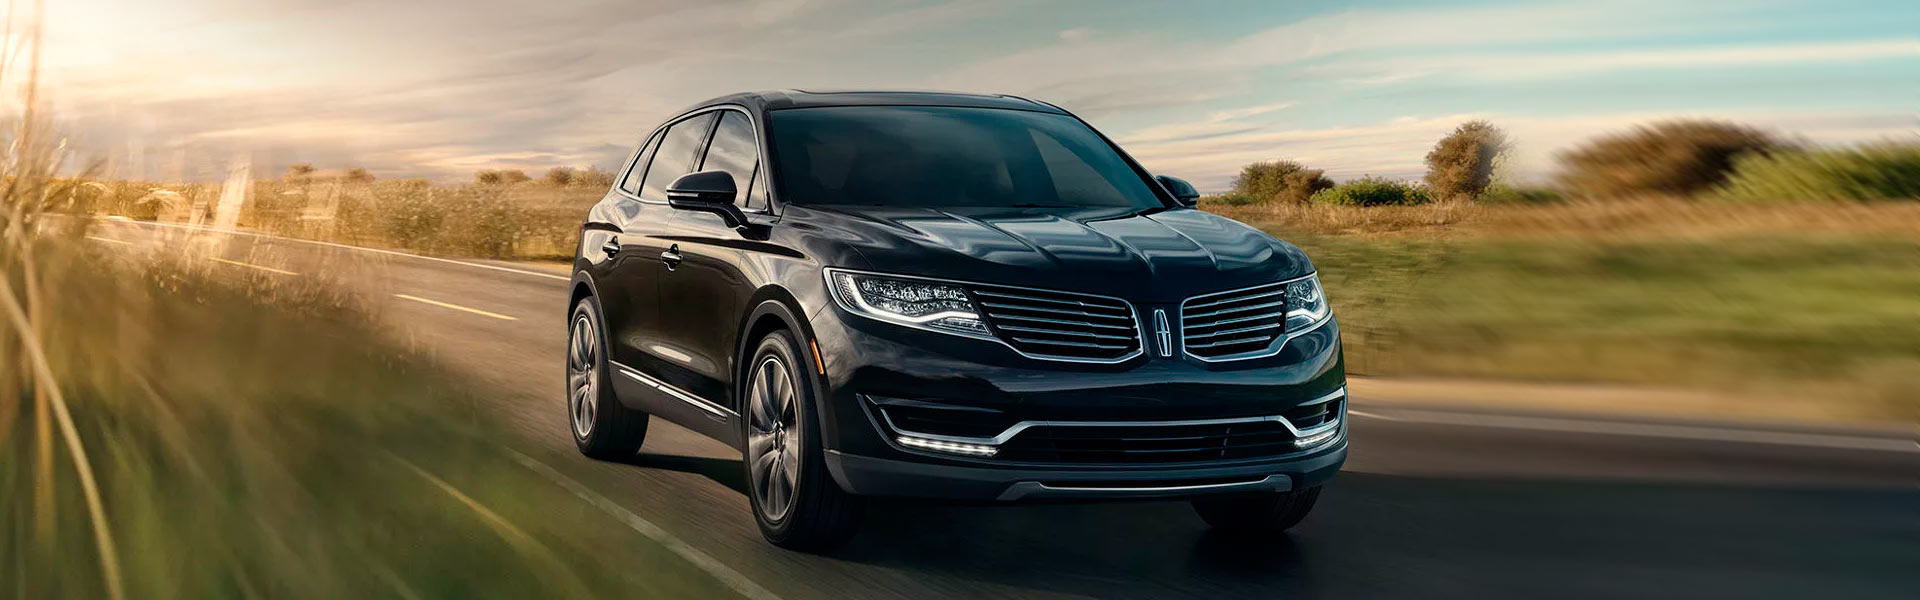 ТО Lincoln MKX